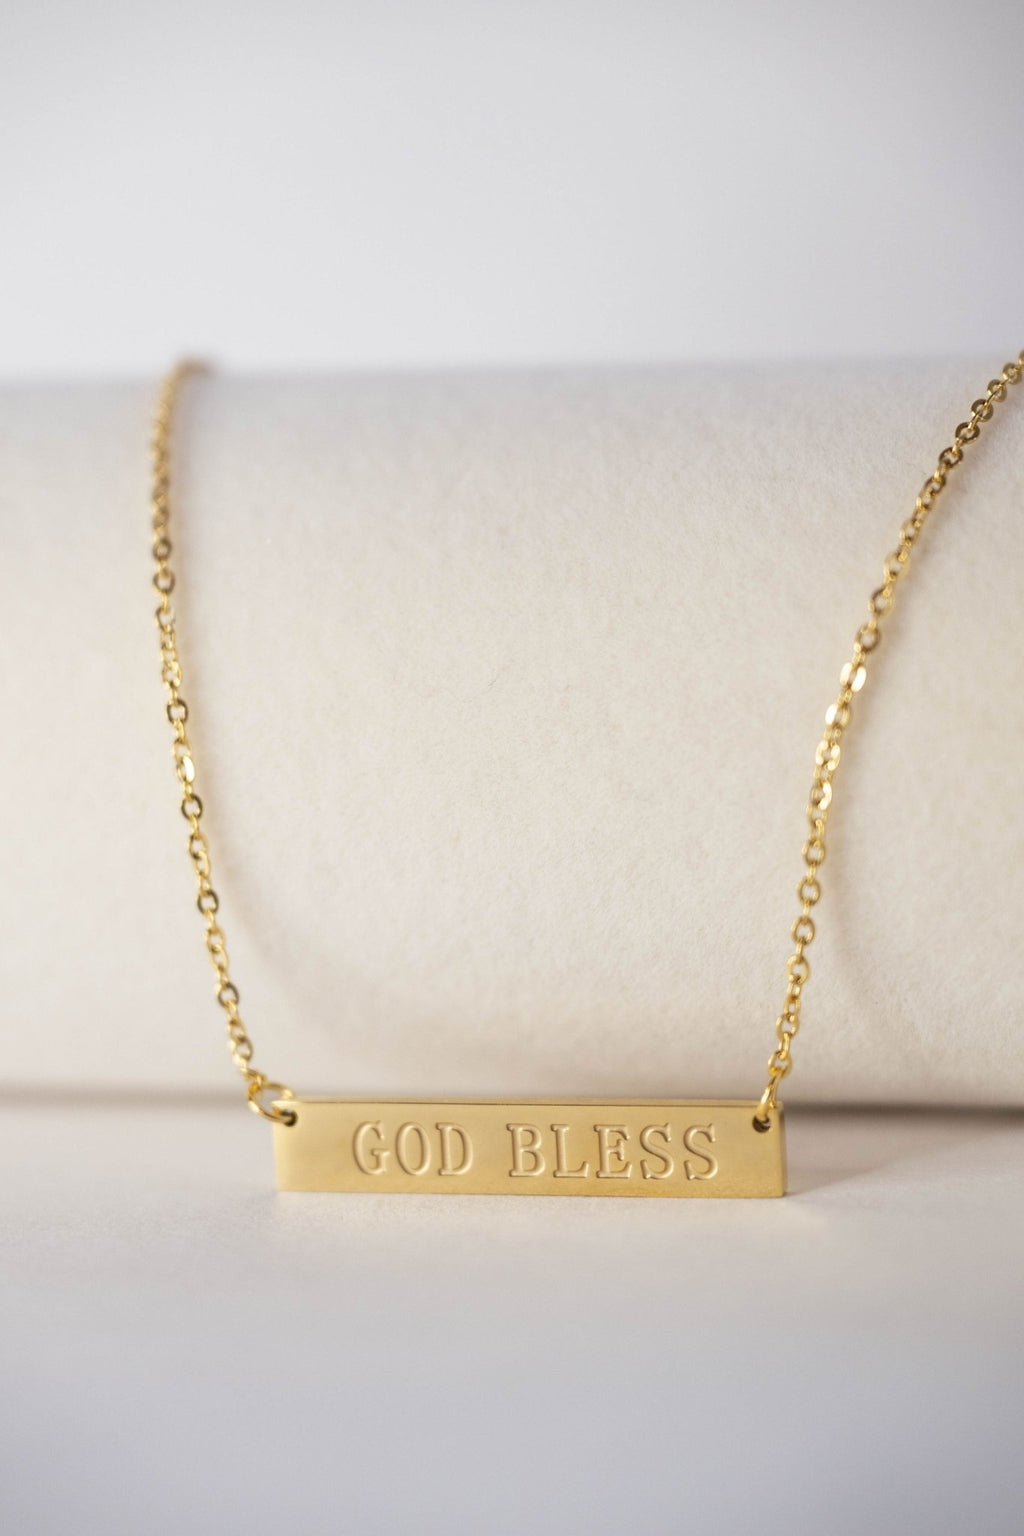 God Bless 18k Gold-Plated Necklace - A Meaningful Mood